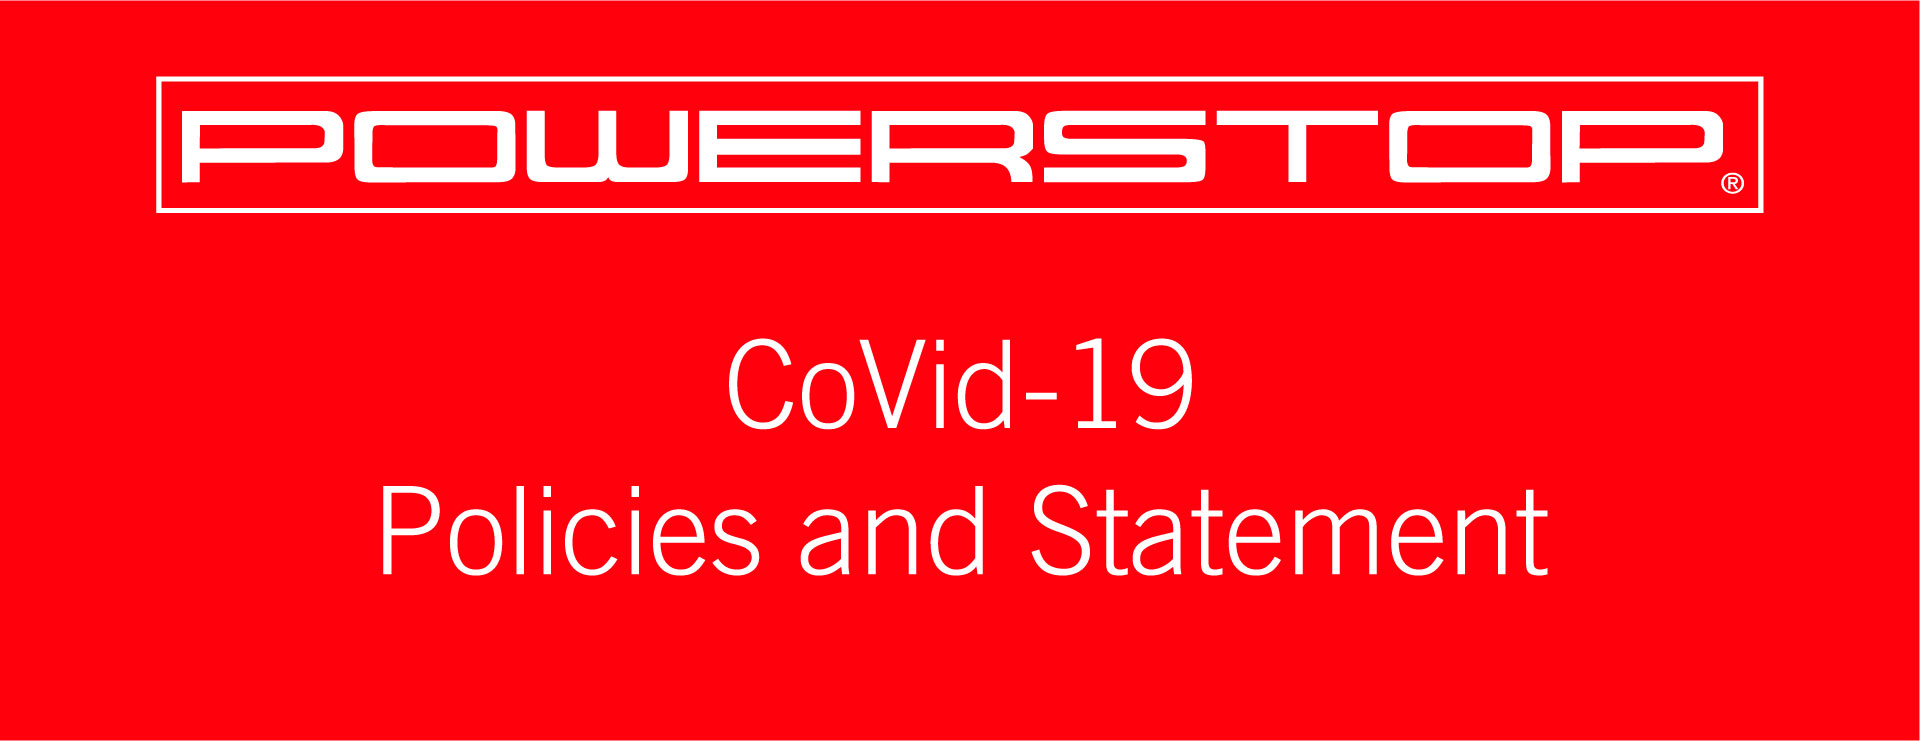 PowerStop Official Statement CoVid-19 2020